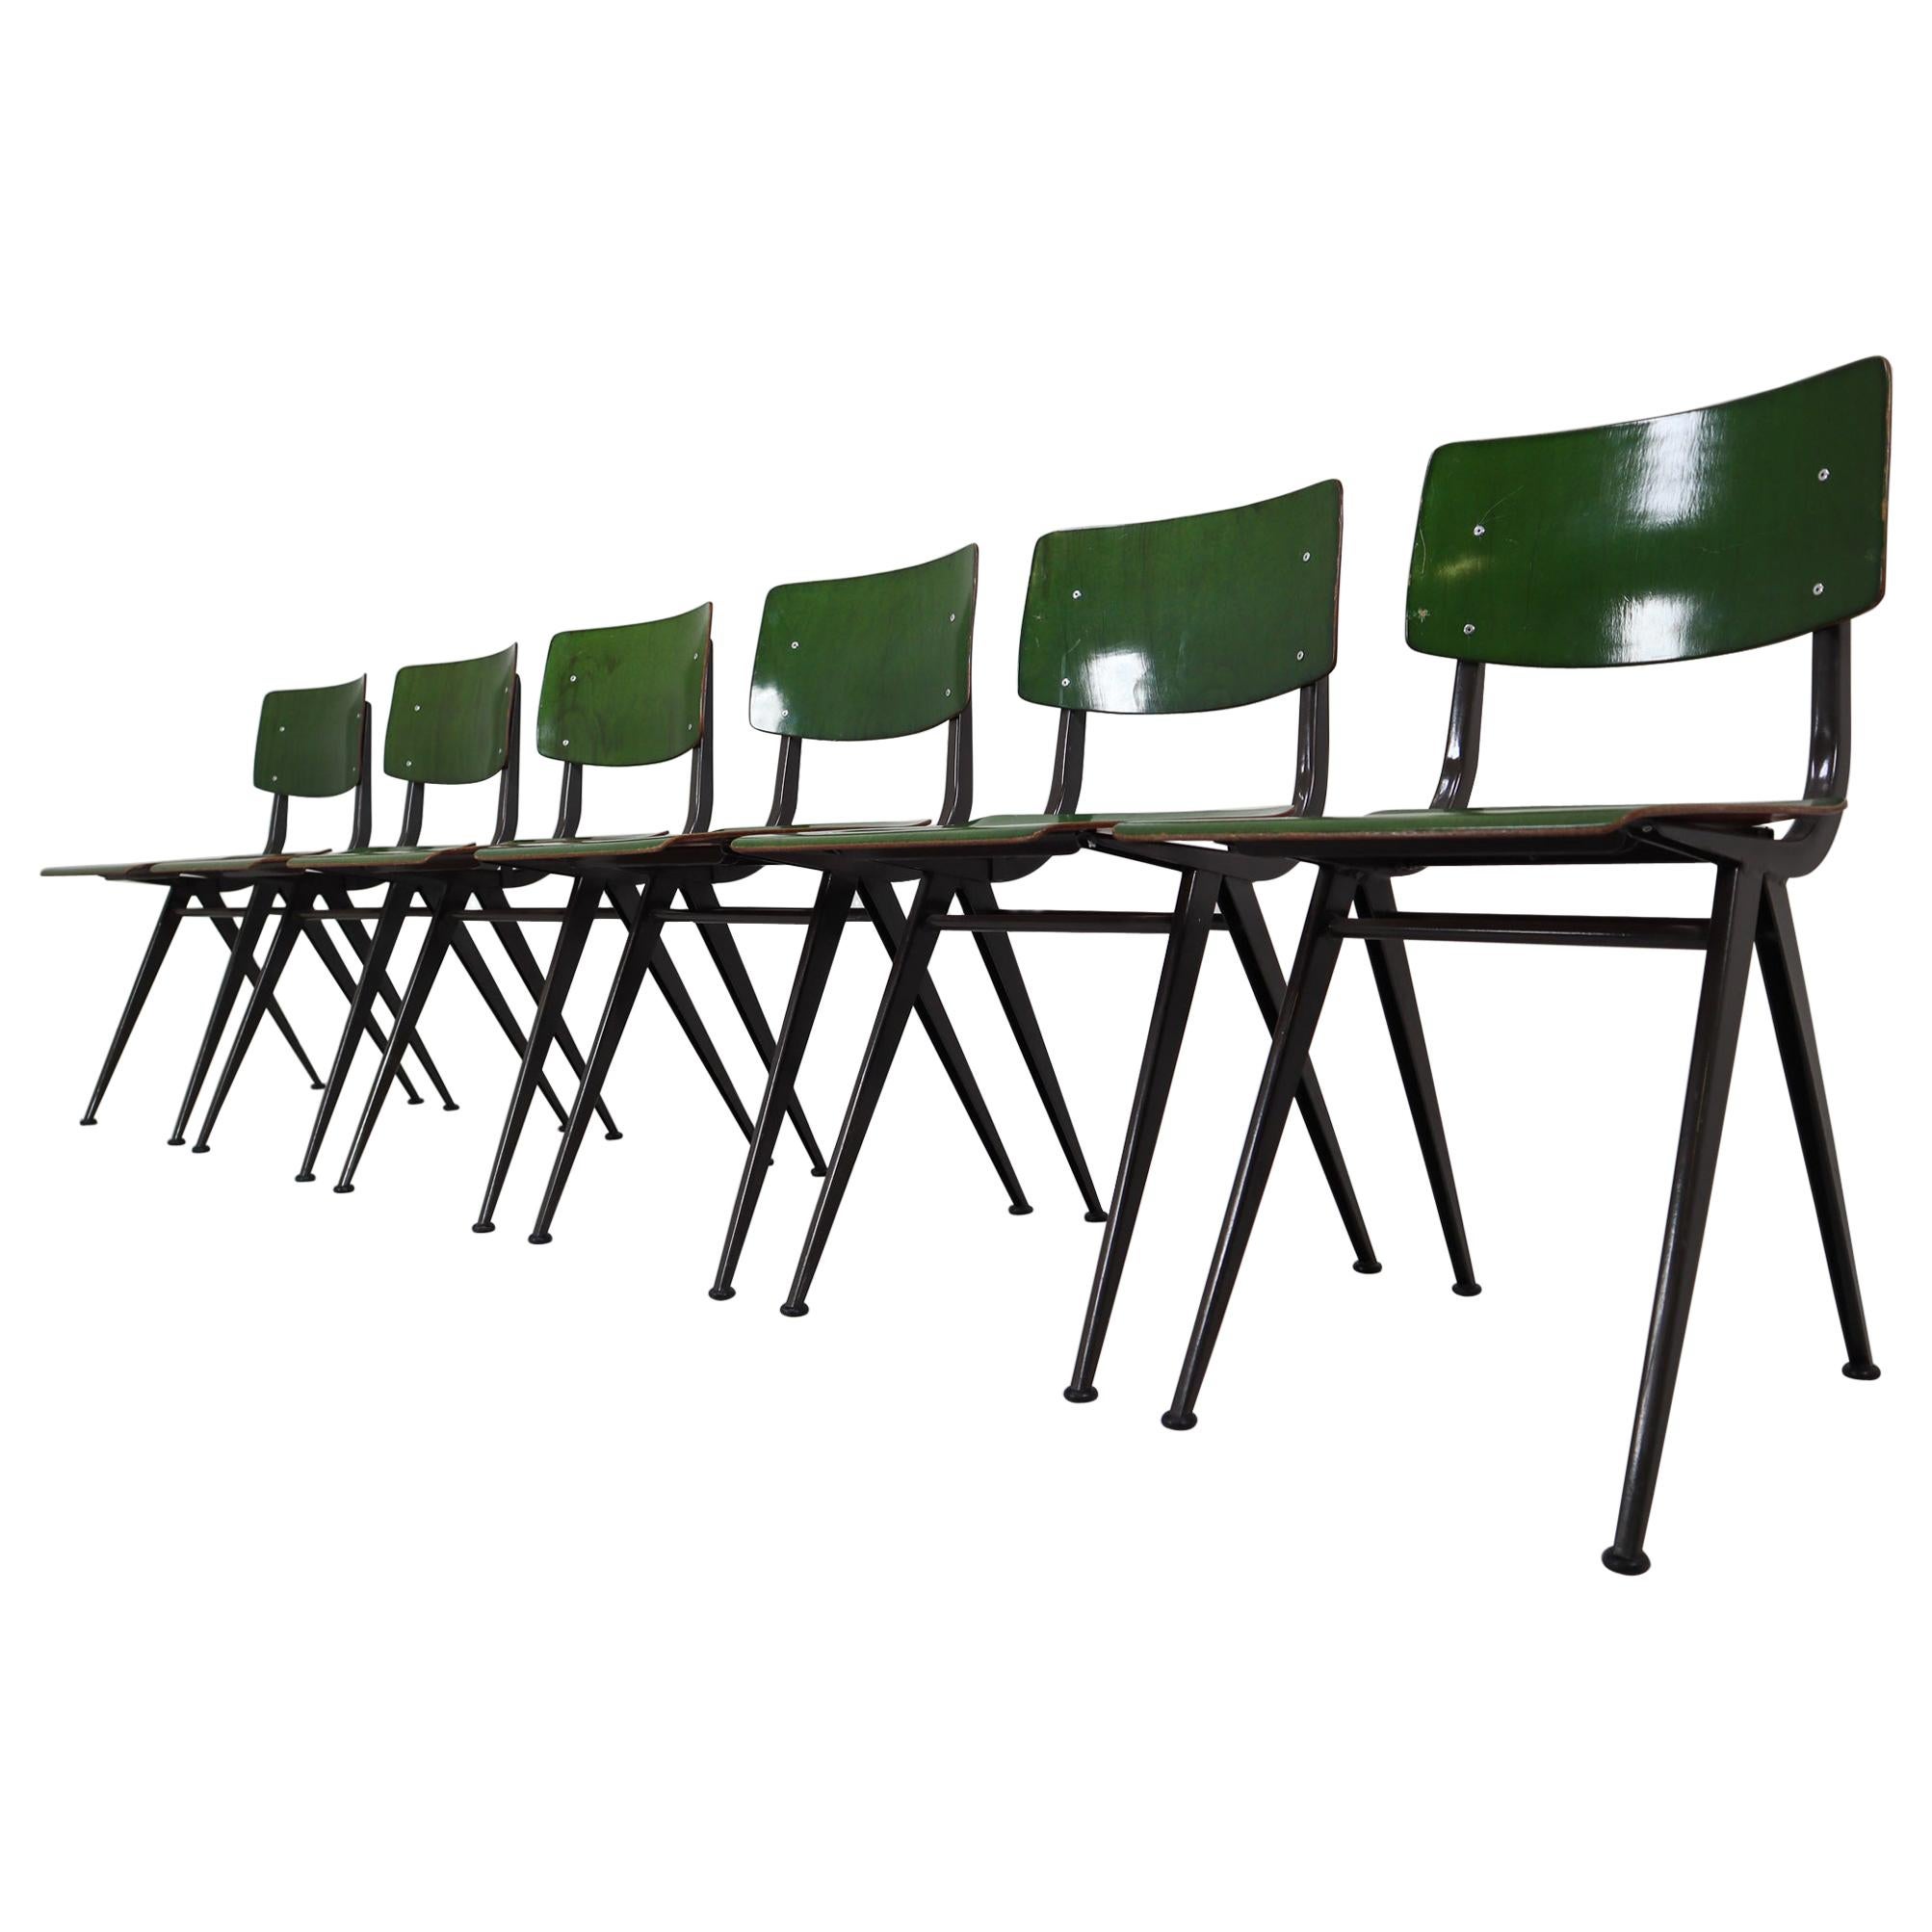 Six Compass Shaped Industrial Chairs by Marko Holland 1960s in Green Patina